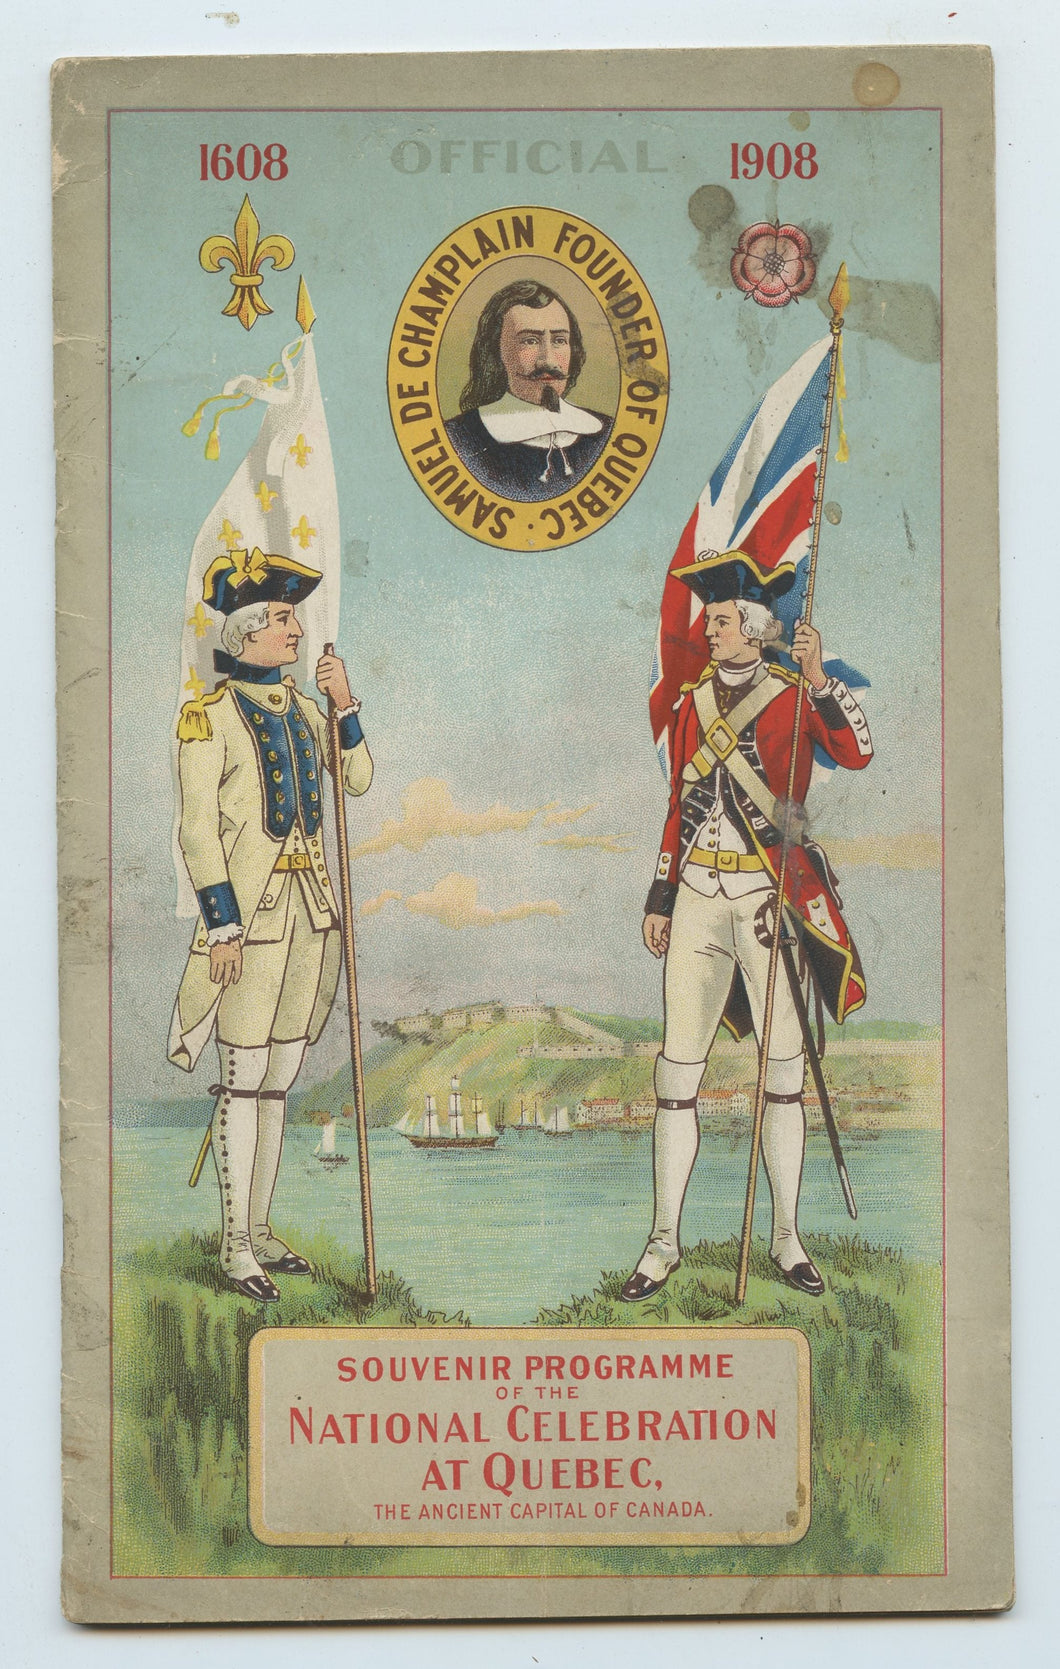 Souvenir Programme of the National Celebration at Quebec, the Ancient Capital of Canada 1608-1908